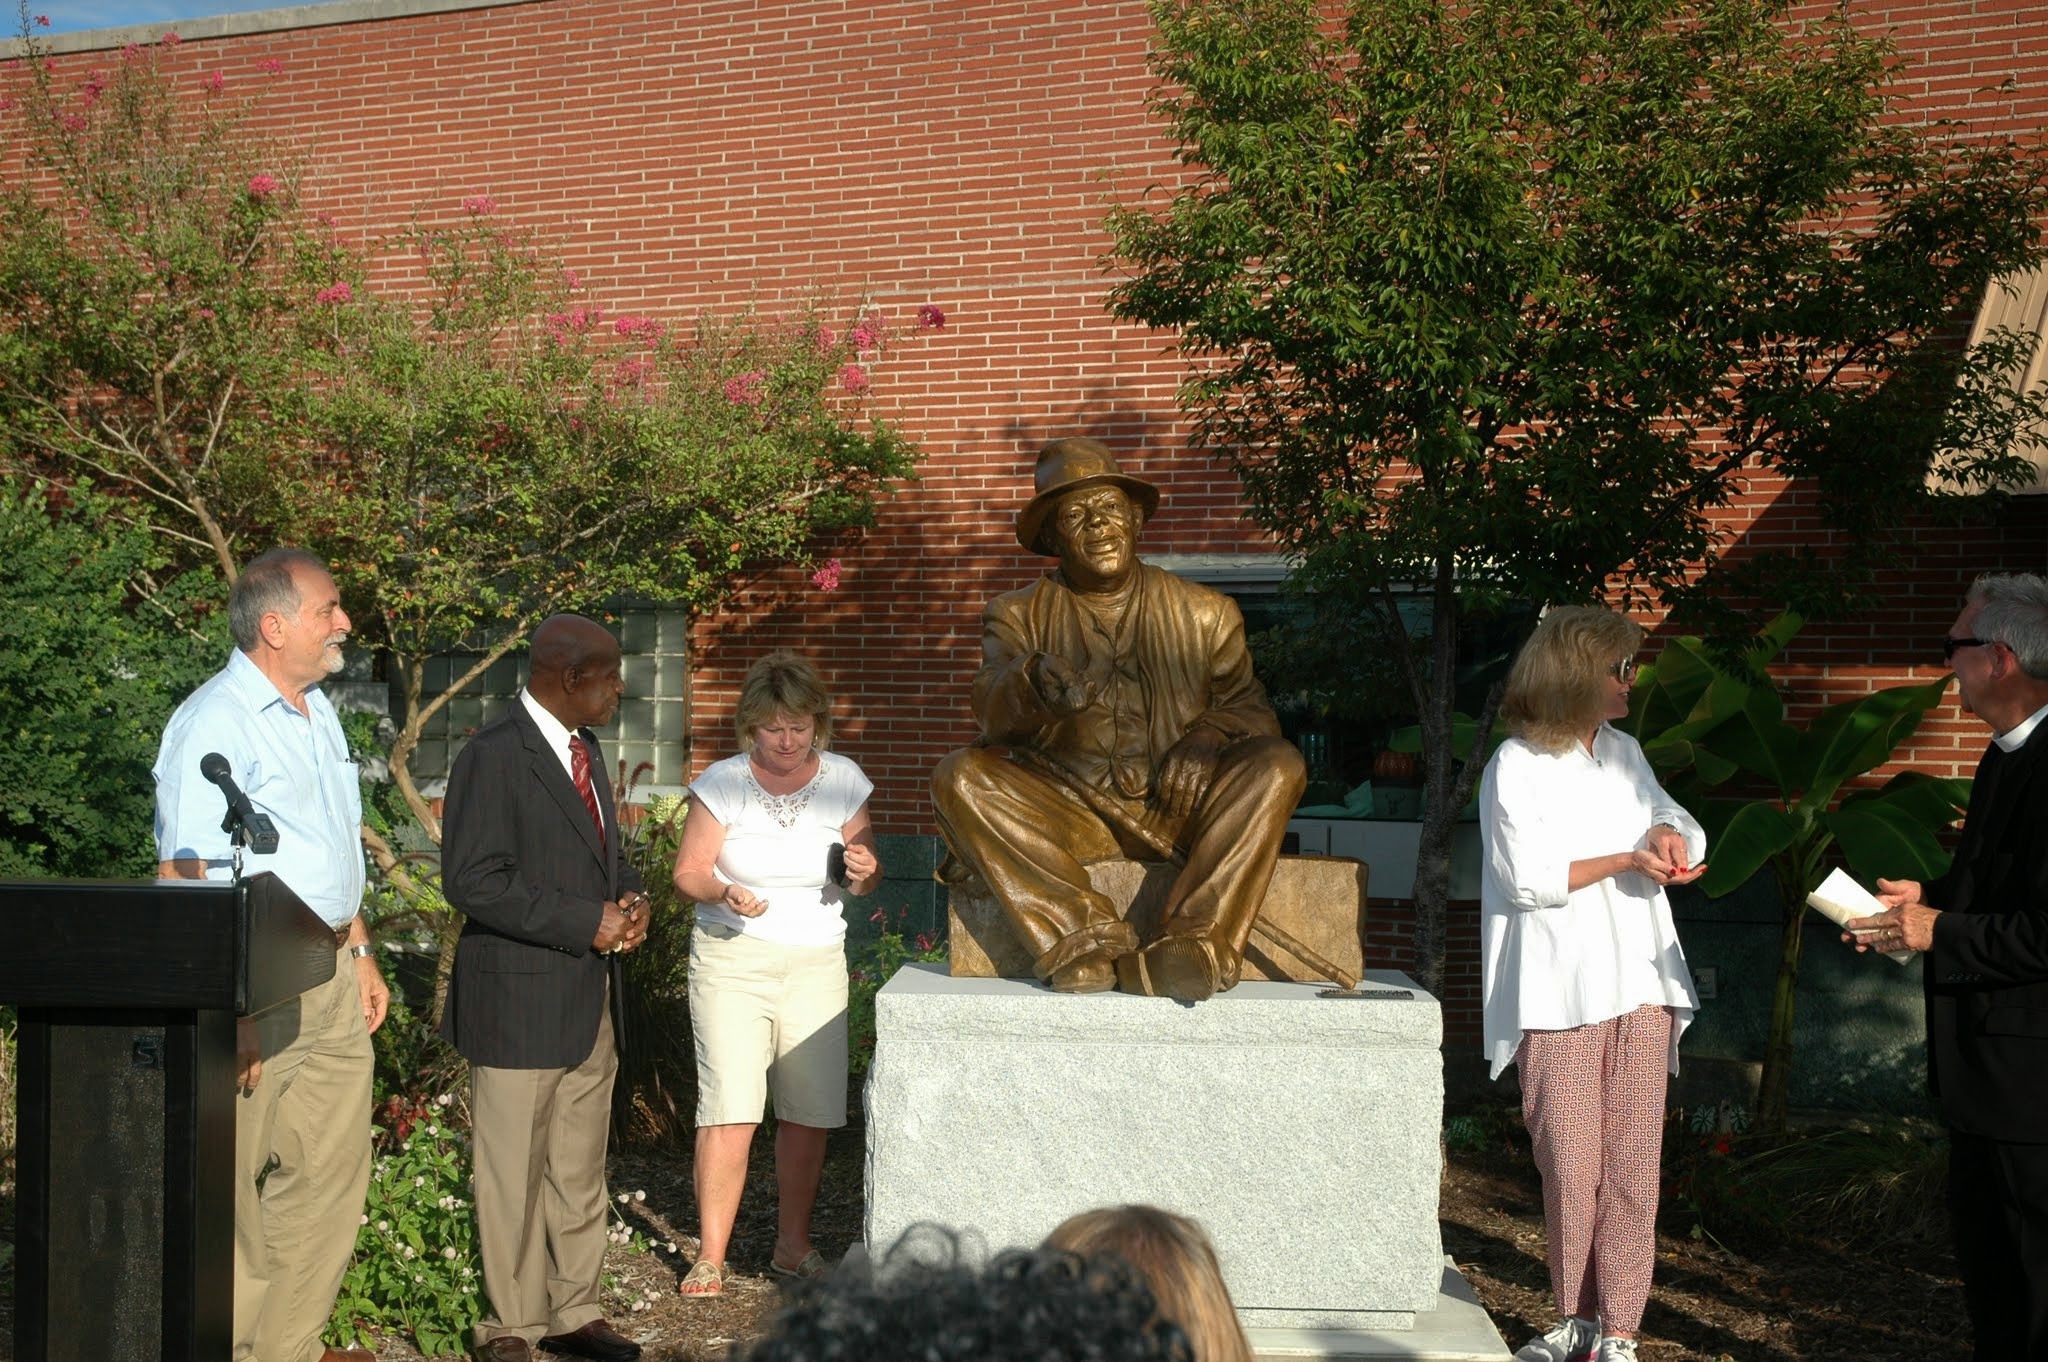 Attendees taking a close look at the sculpture